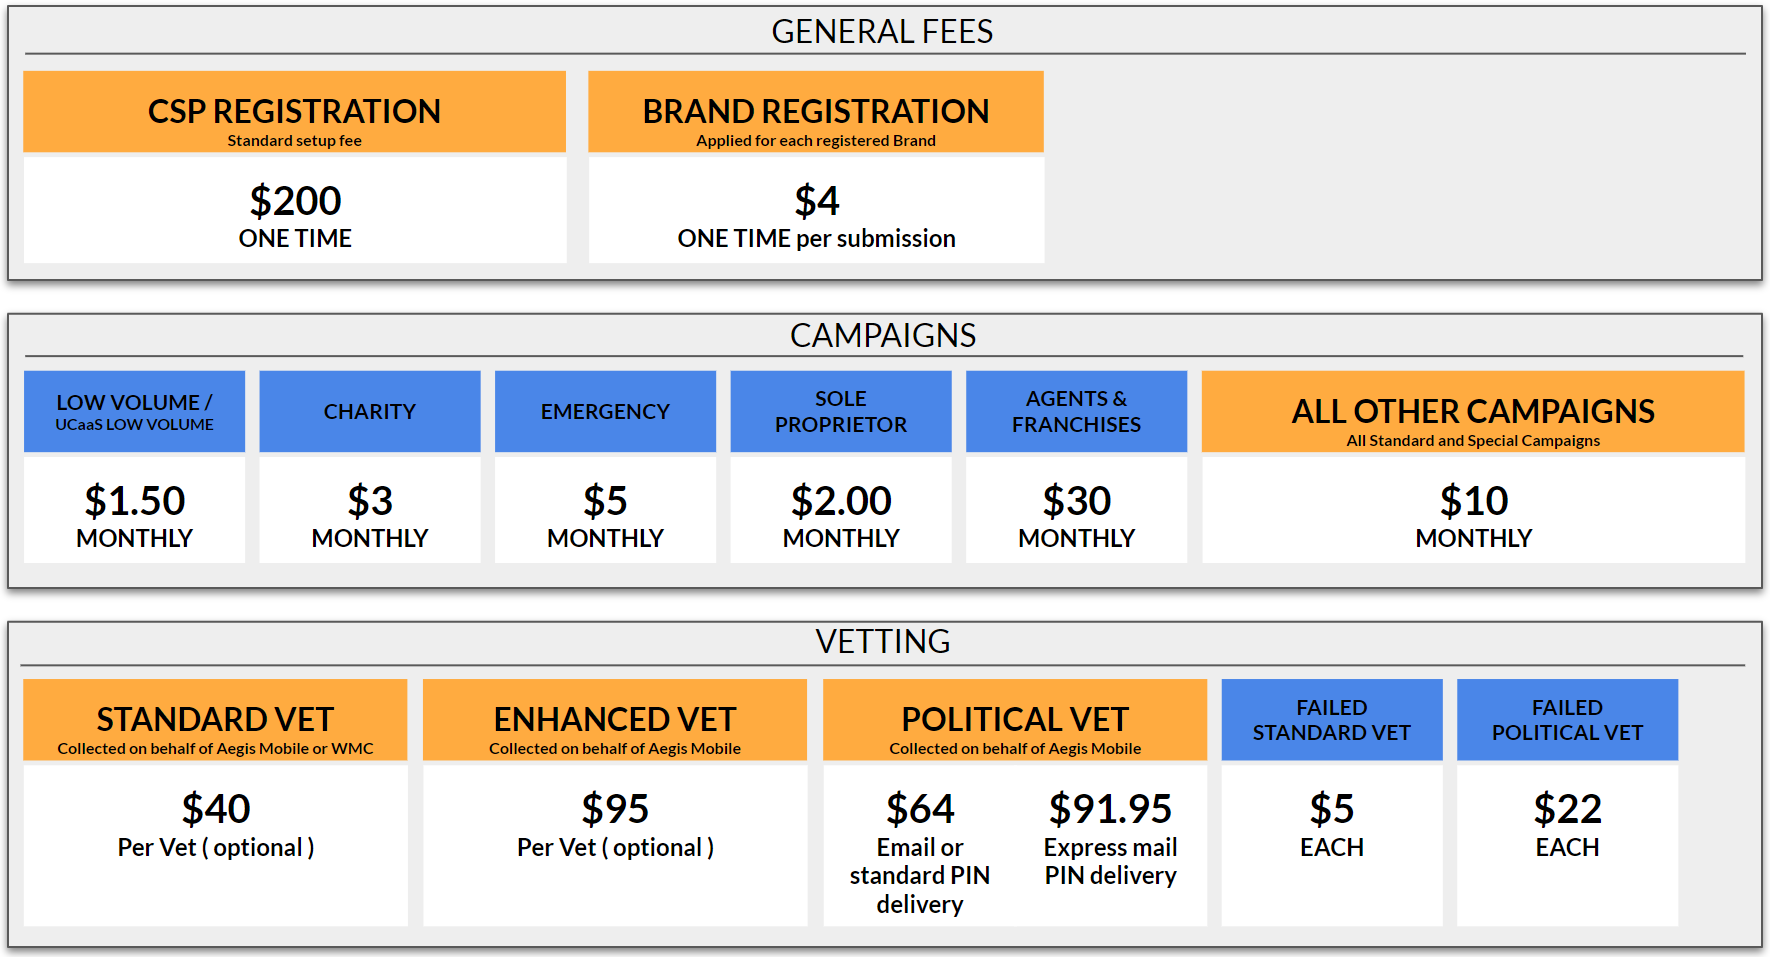 A diagram of The Campaign Registry fees information. Under 'General Fees', CSP Registration is one-time $200 fee. Brand Registration costs $4 per submission. A range of monthly fees between $1.50 and $30 are described within the 'Campaigns' section. Within 'Vetting', a standard vet costs $40, an enhanced vet costs $95, a political vet costs $64 with standard PIN delivery or $91.95 for express mail PIN delivery, and failed vets are assessed a $5 fee (or a $22 fee for political vets). 